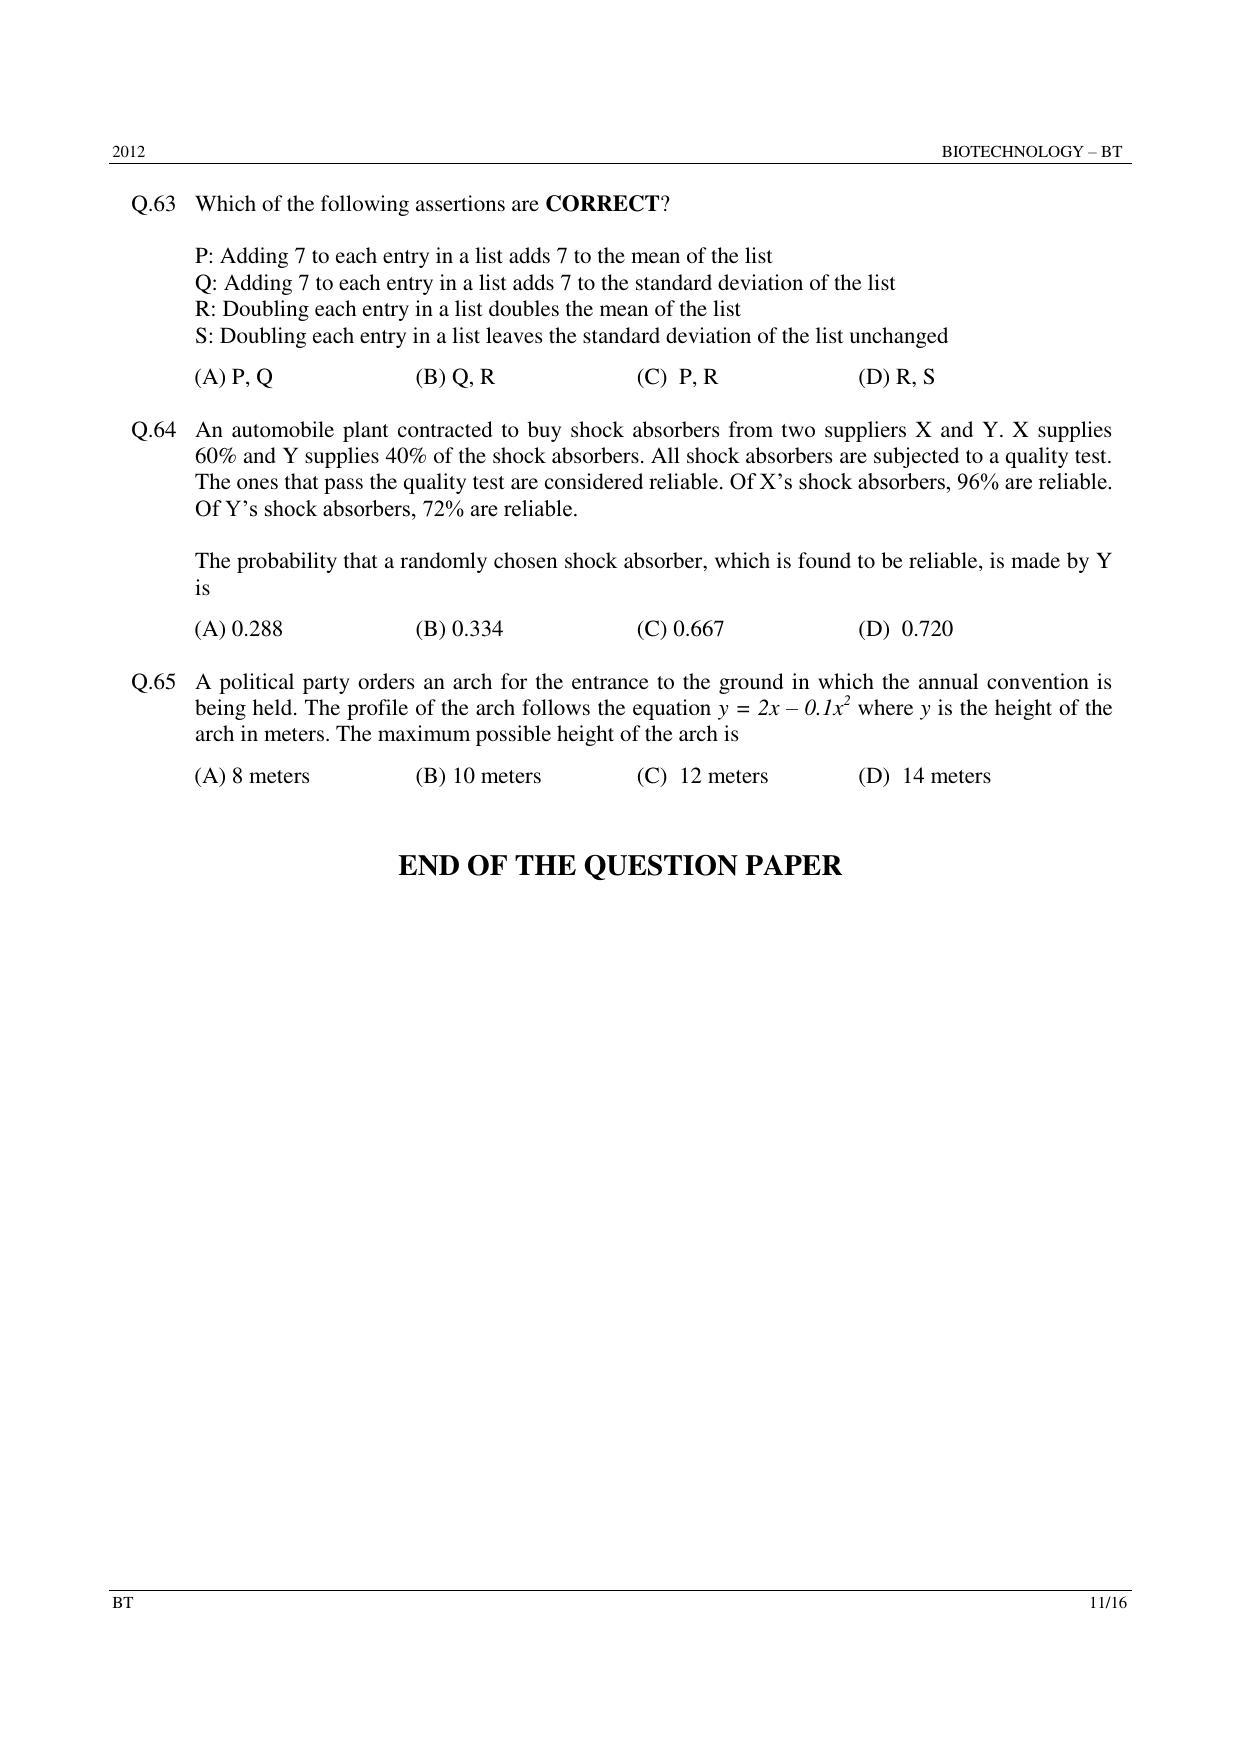 GATE 2012 Biotechnology (BT) Question Paper with Answer Key - Page 11